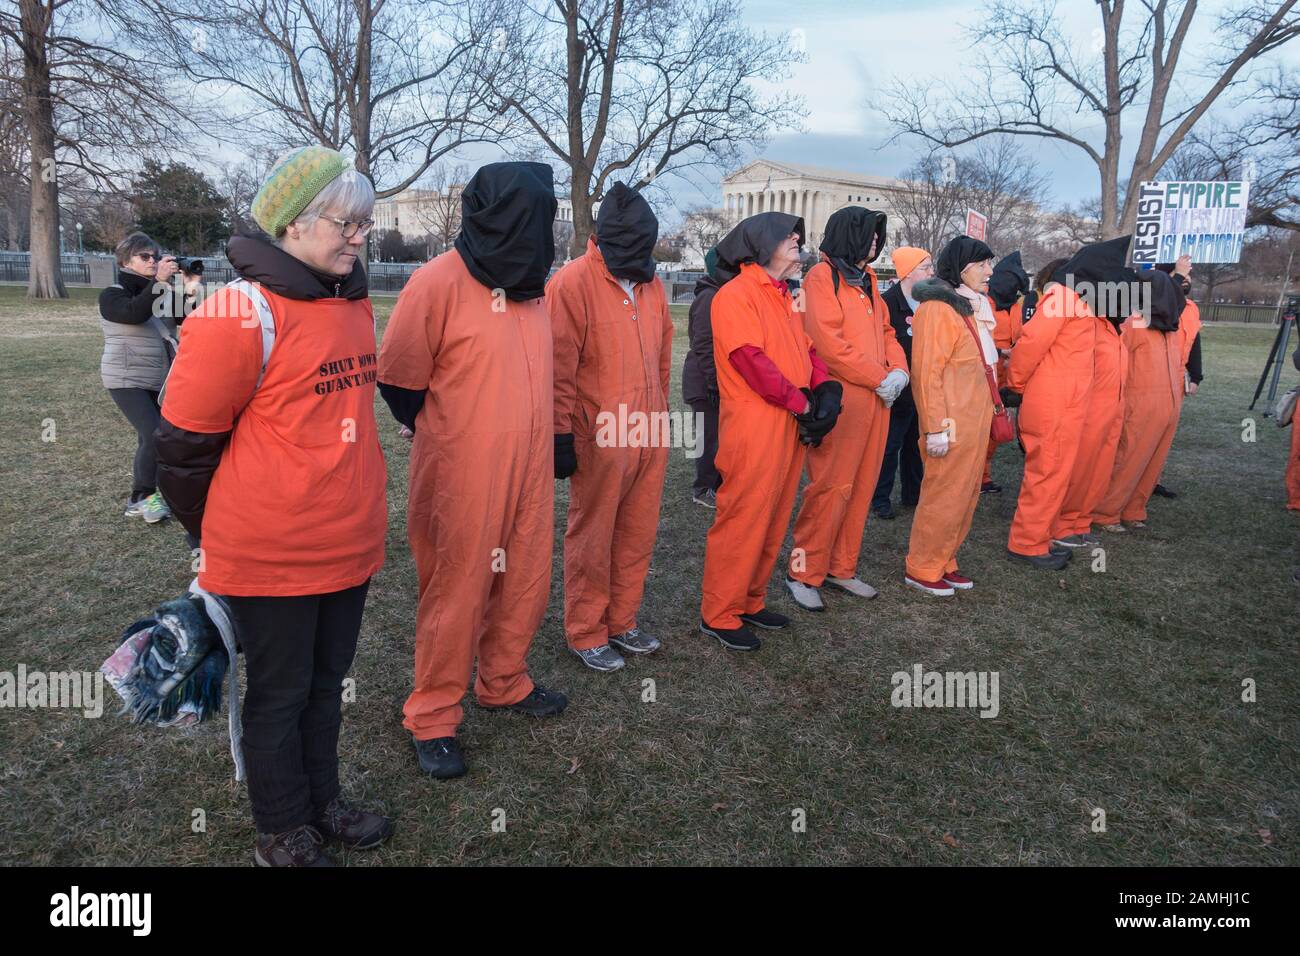 Demonstrating against use by US government of Guantanamo prison, members of Witness Against Torture at Capitol during anti Iran war rally.Jan. 9, 2020 Stock Photo